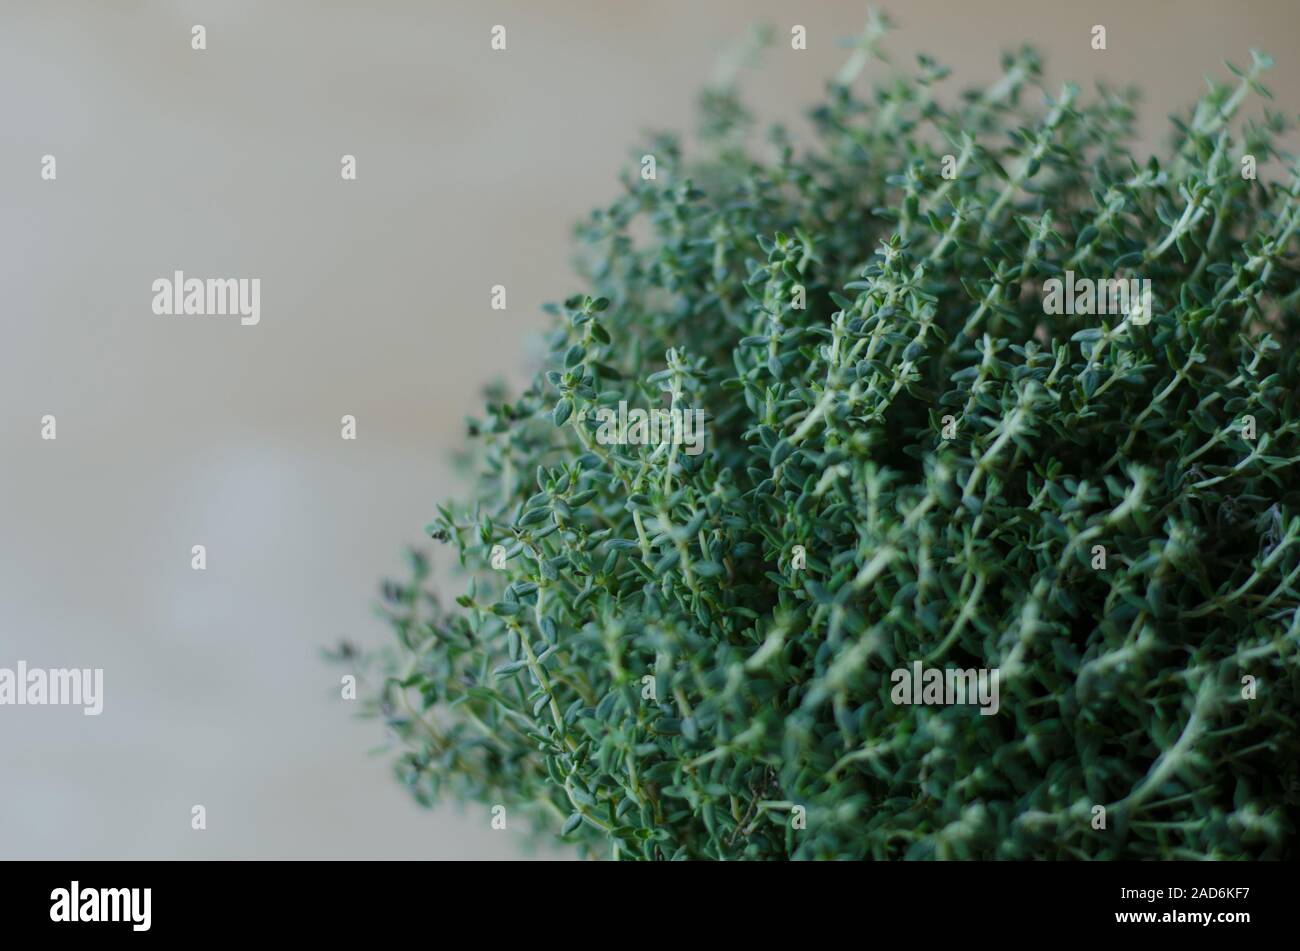 Thyme plant in closeup Stock Photo